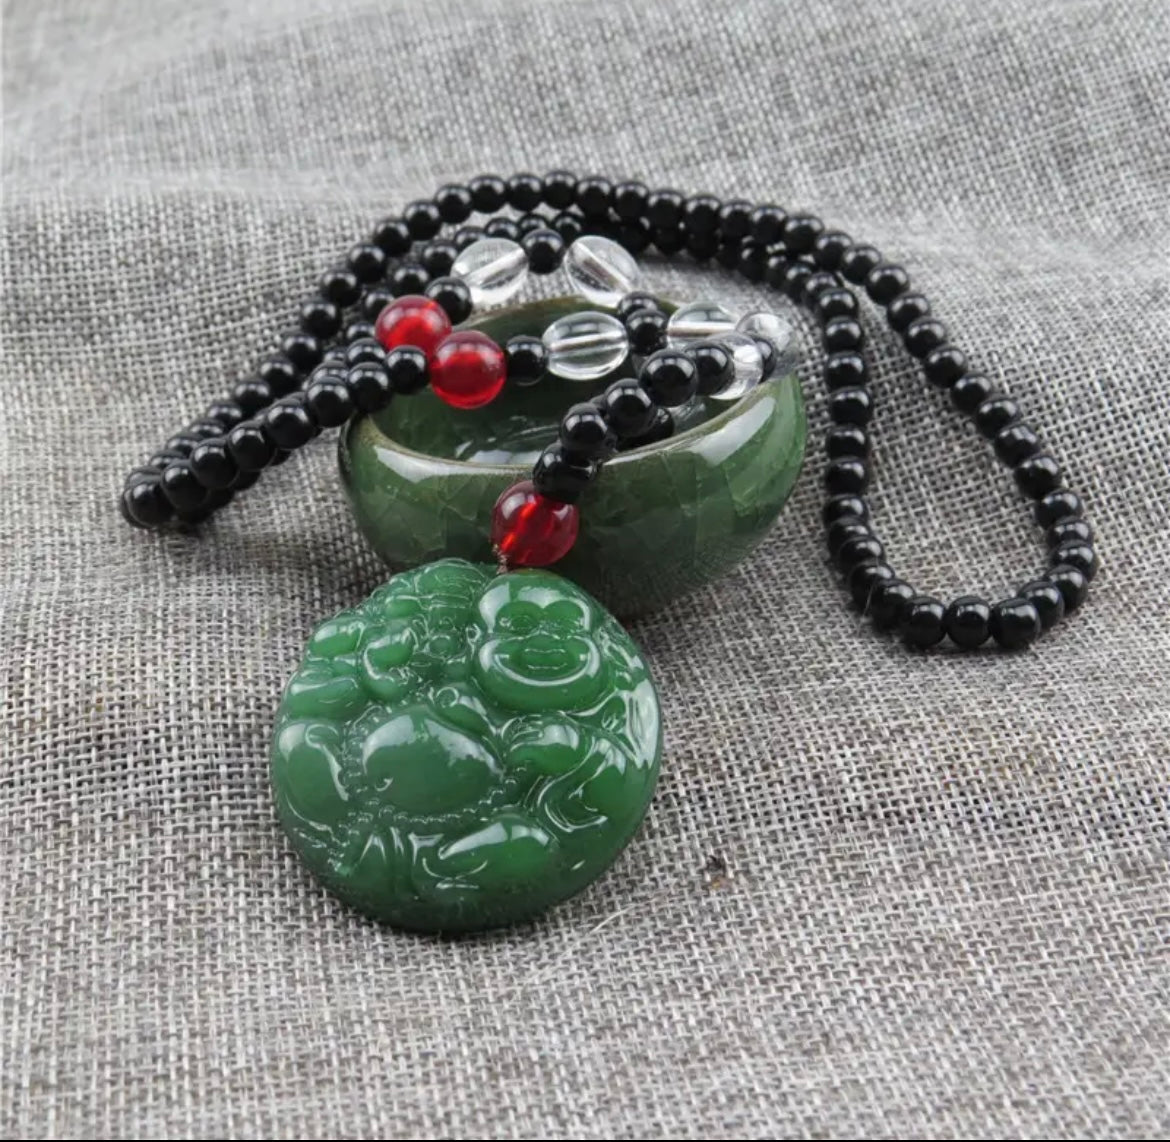 Lucky Jade Pendant Necklaces